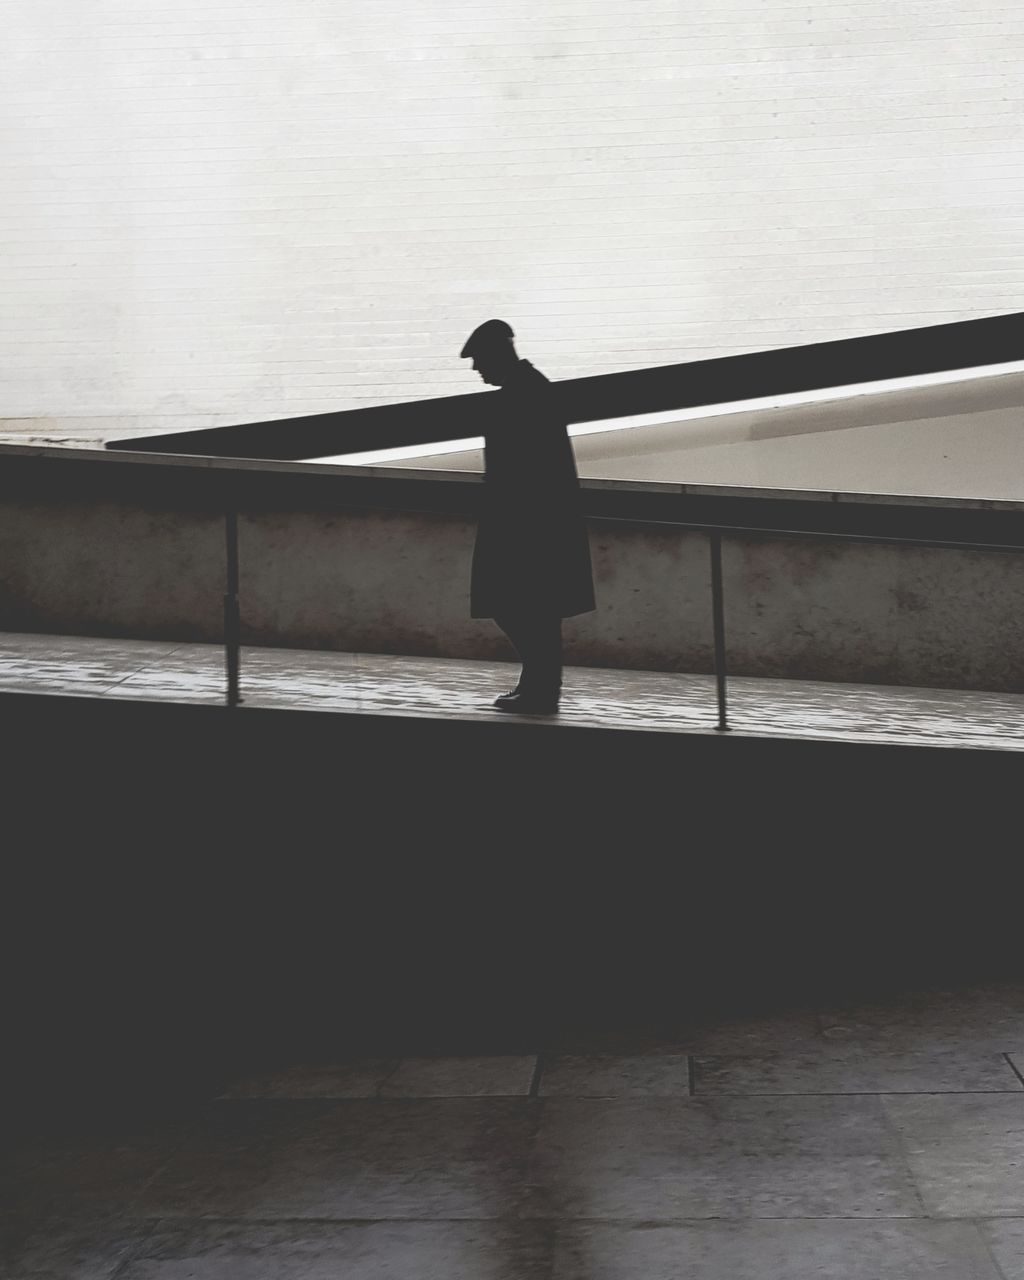 SIDE VIEW OF SILHOUETTE WOMAN STANDING BY RAILING